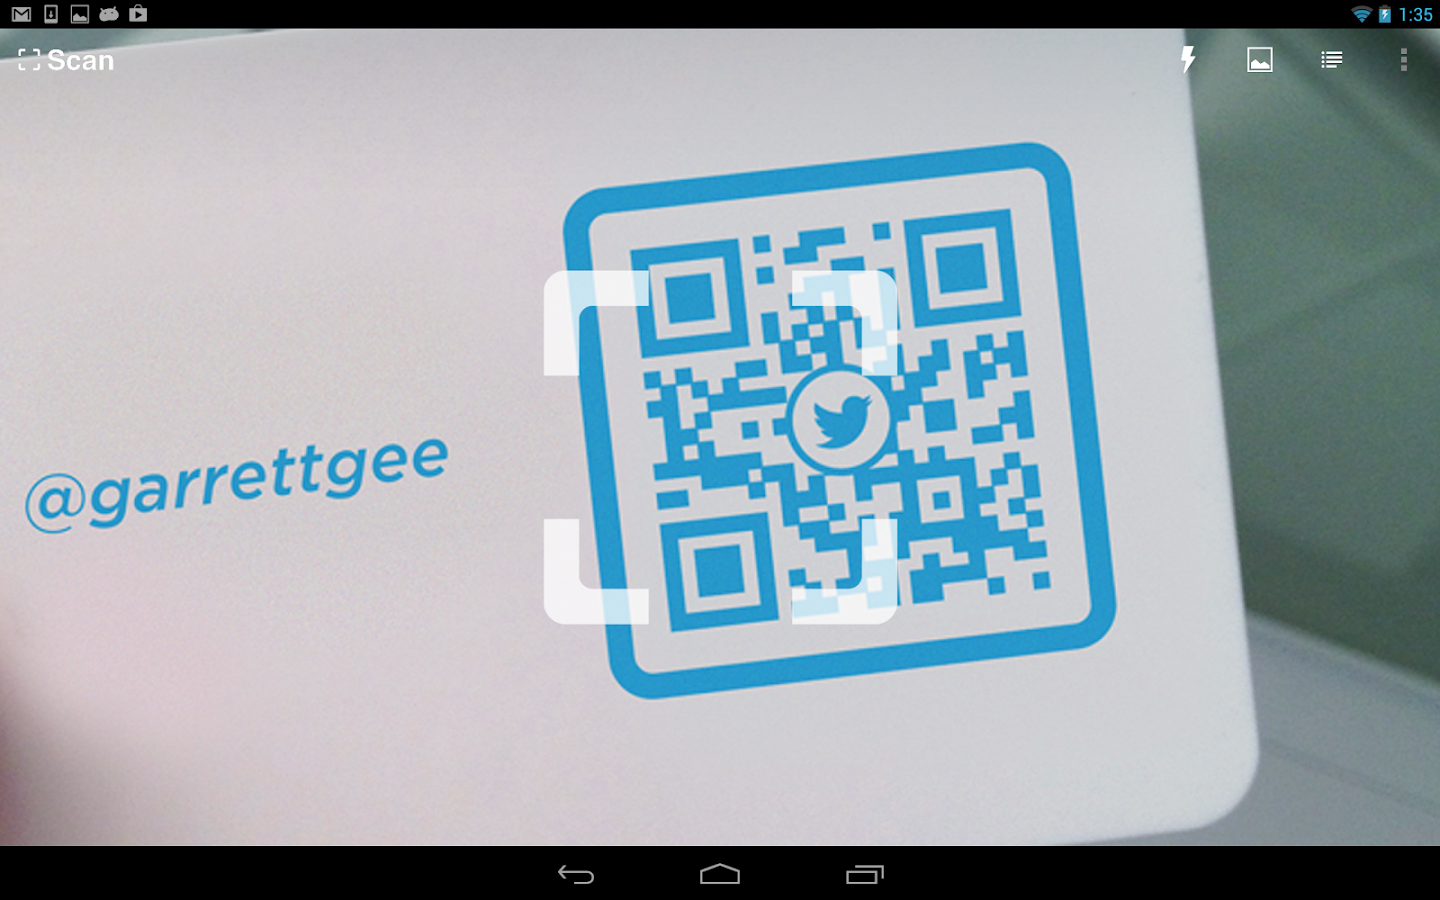 QR Code Reader - Android Apps on Google Play